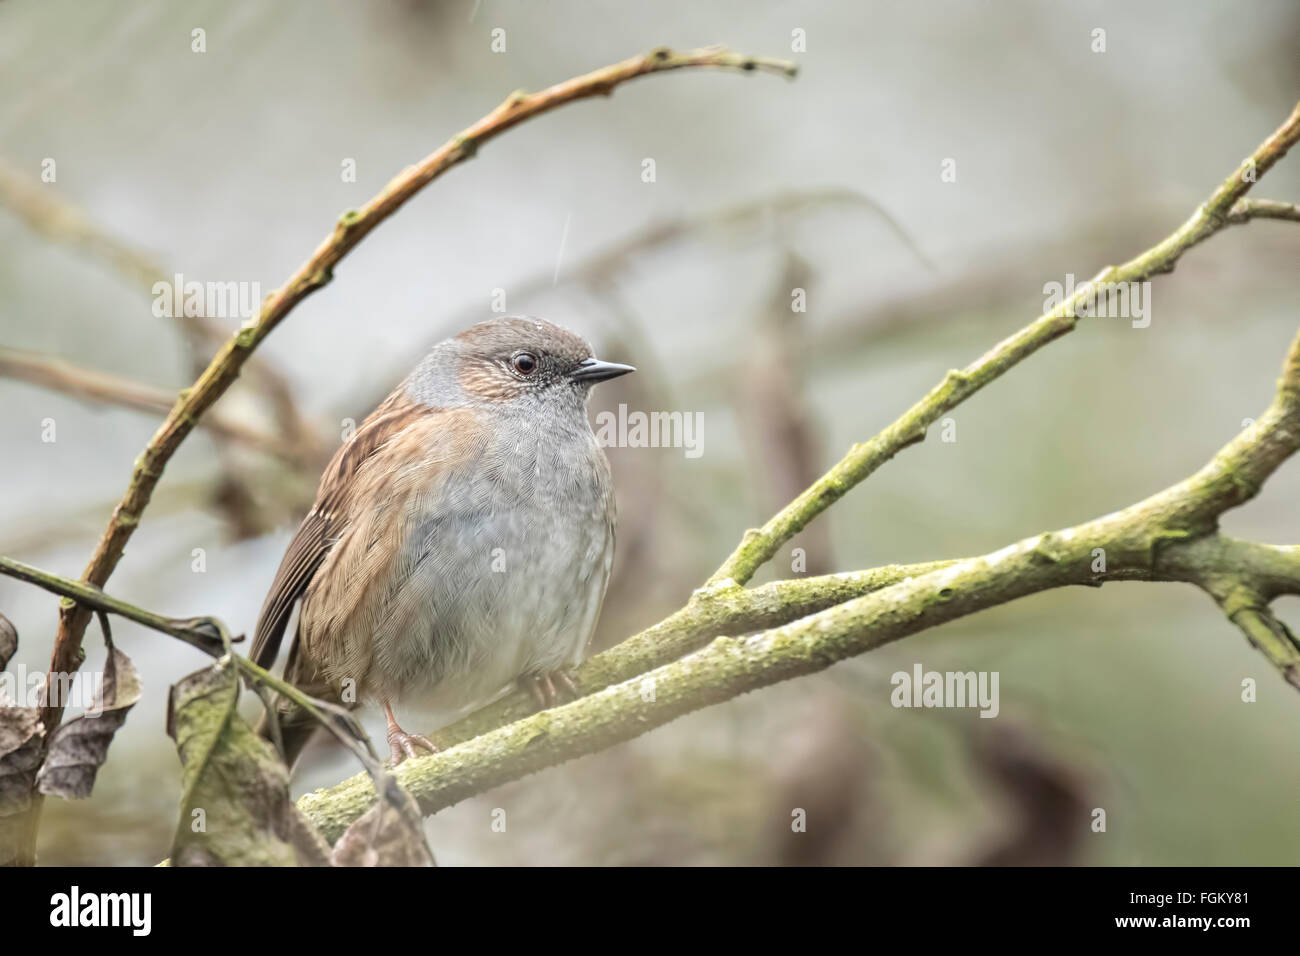 Dunnock, prunella modularis, deep in a forest perched in a bush. Stock Photo